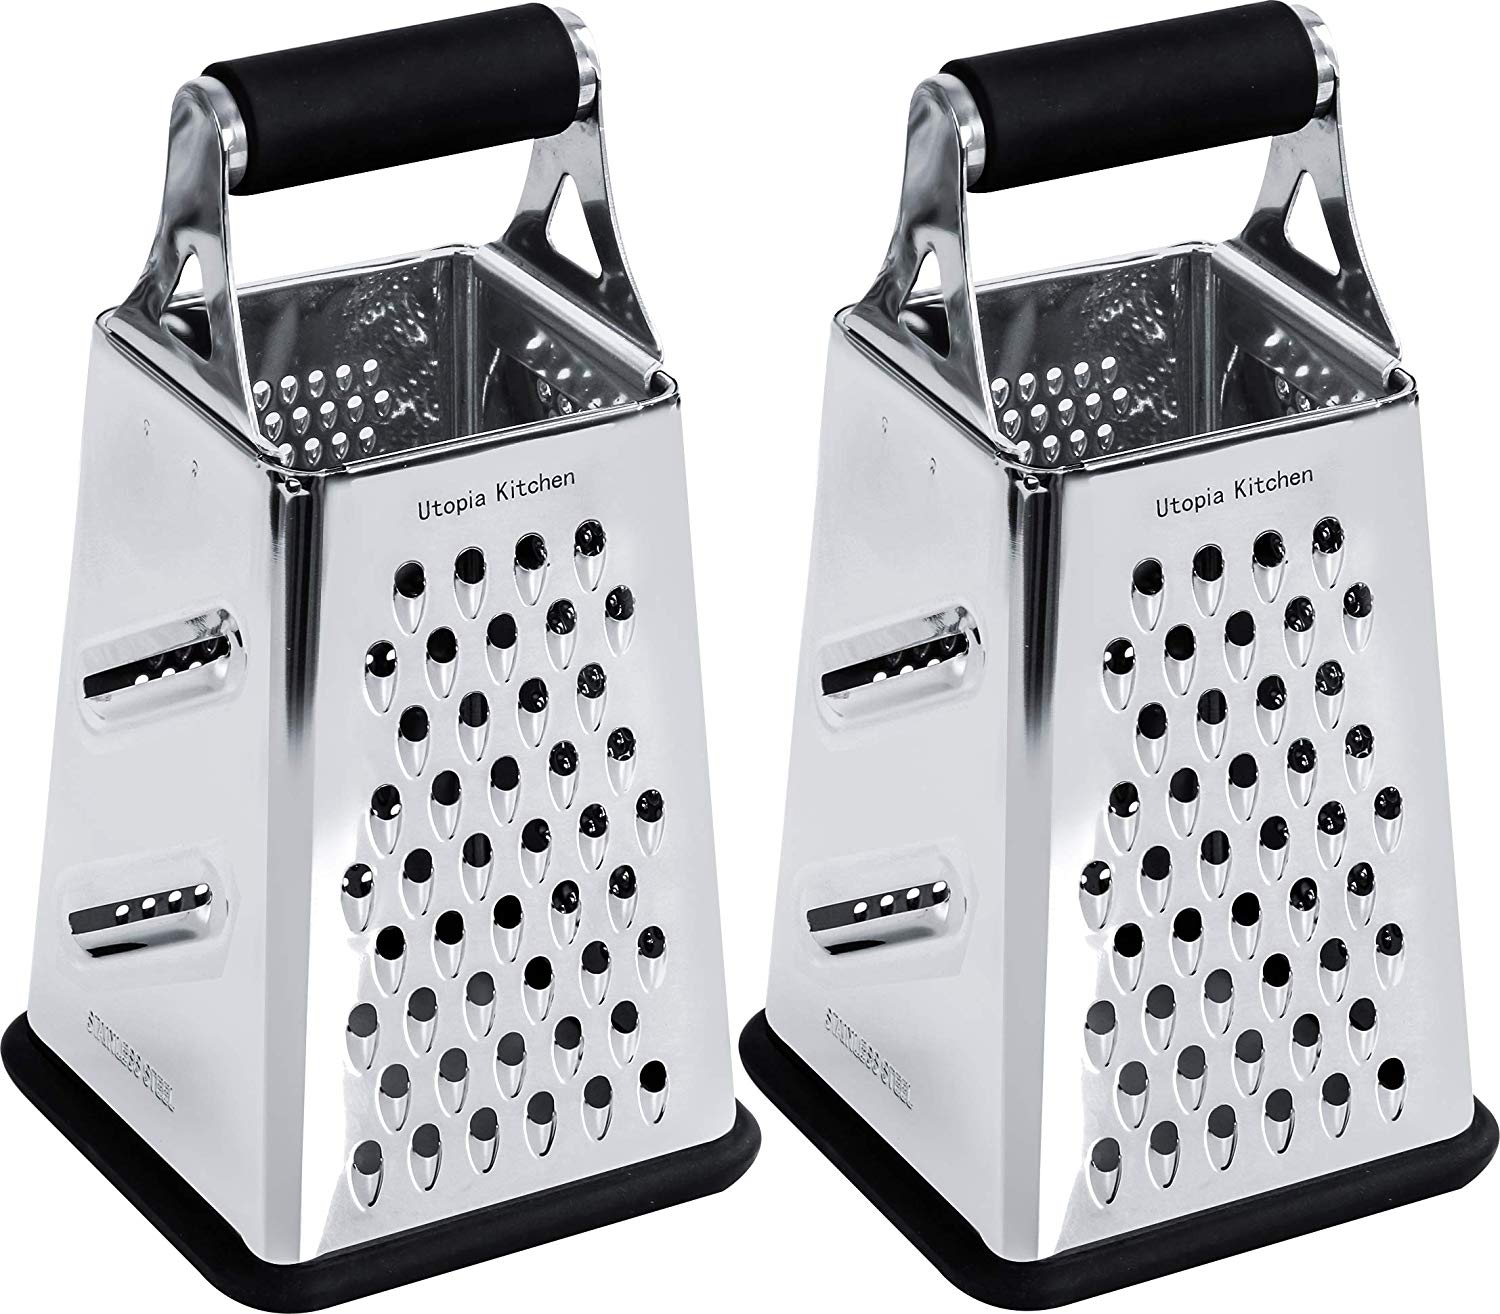 4-Sided Stainless Steel Large 84 Inch Box Grater Potatoes Carrots Lemon  Ginger Vegetables Cheese Grater - Buy 4-Sided Stainless Steel Large 84  Inch Box Grater Potatoes Carrots Lemon Ginger Vegetables Cheese Grater